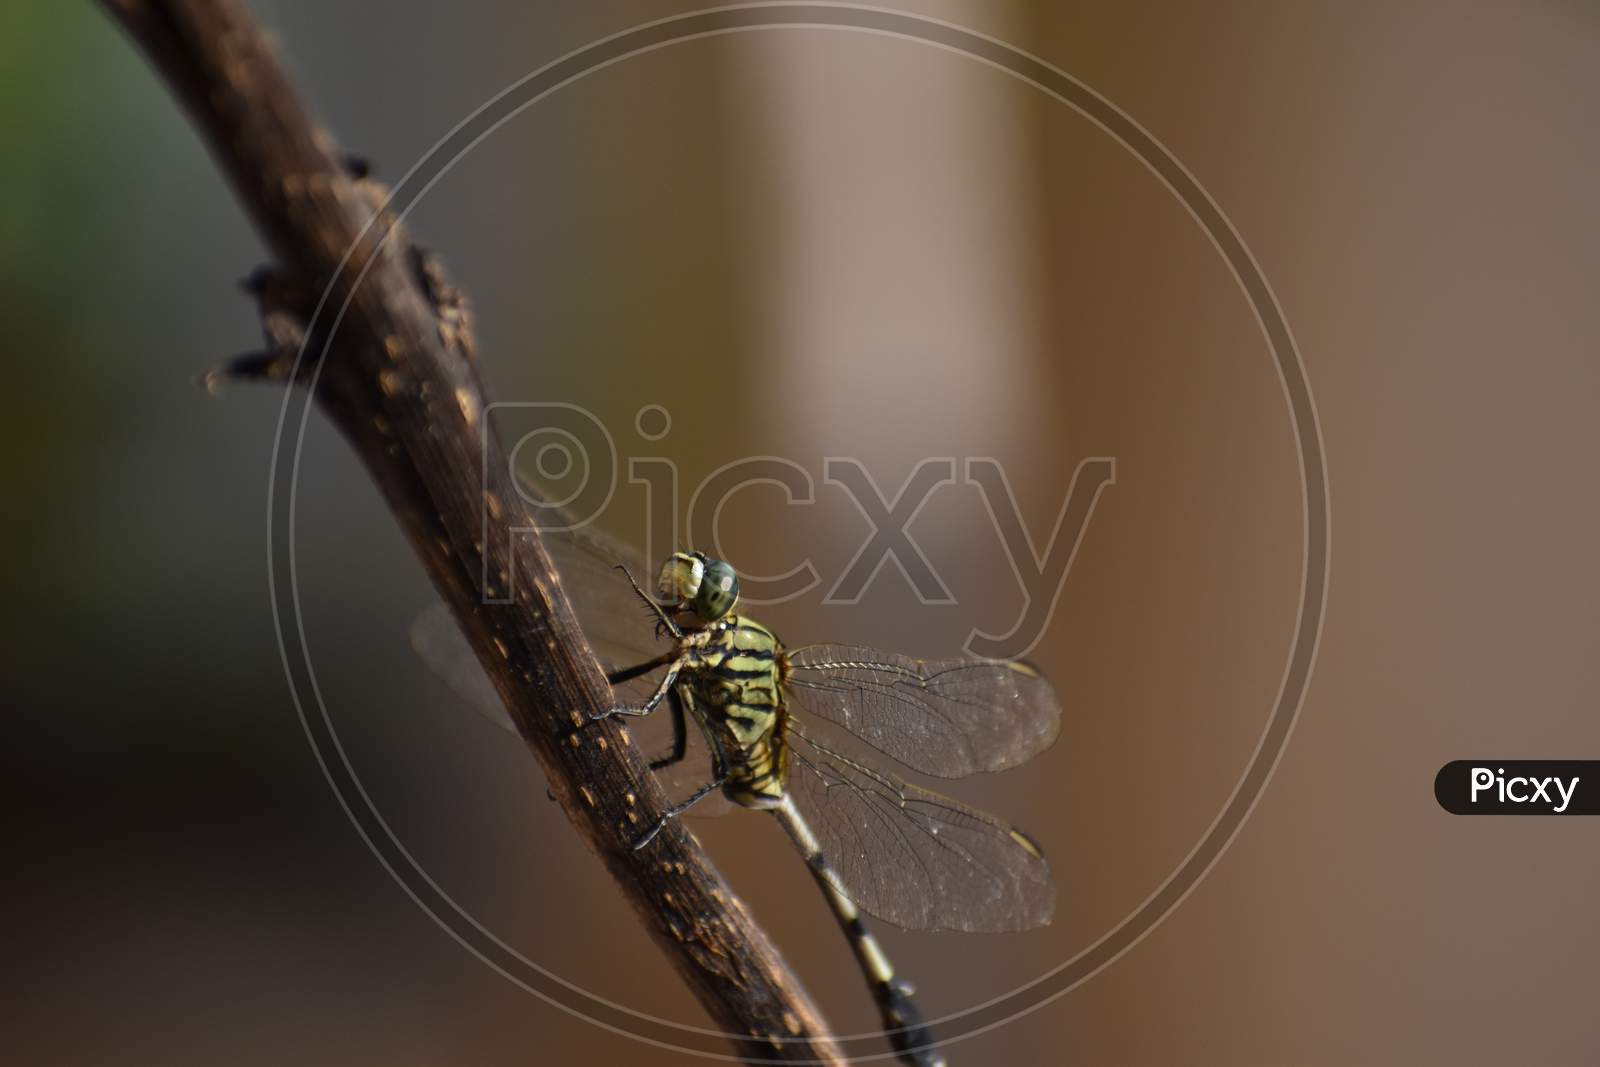 Dragonfly at my house